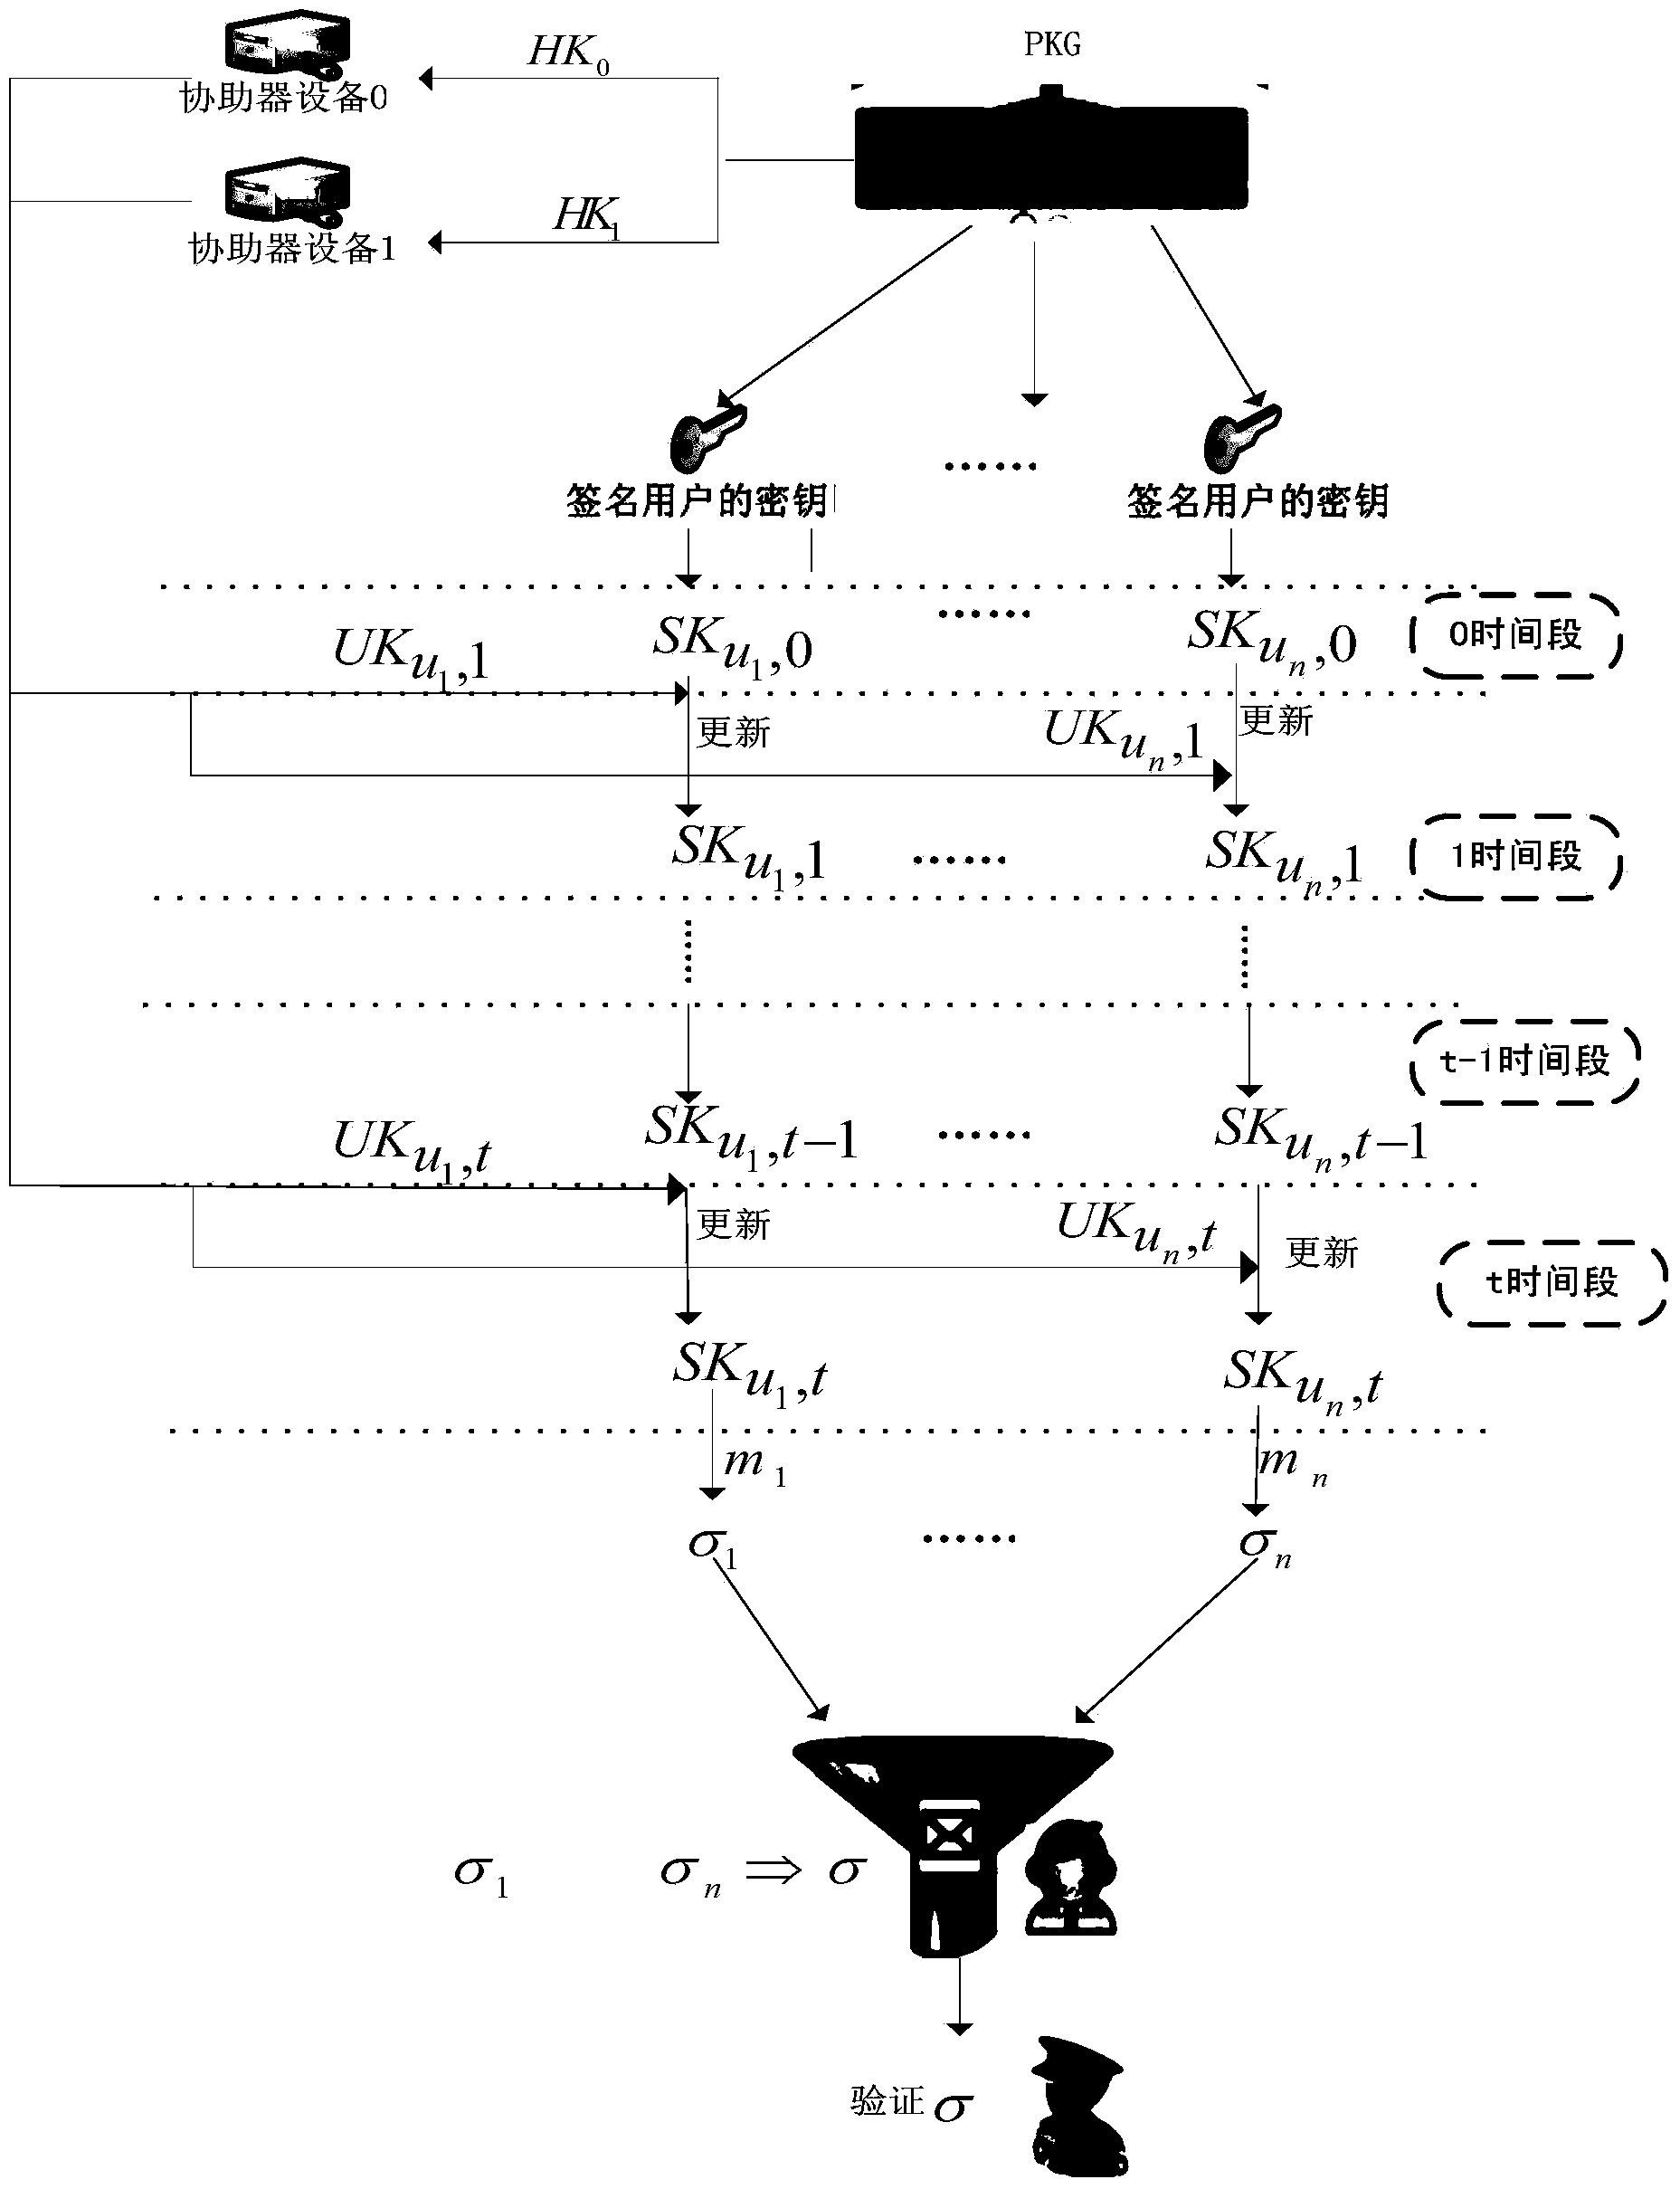 Identity-based aggregate signature method with parallel key-insulation